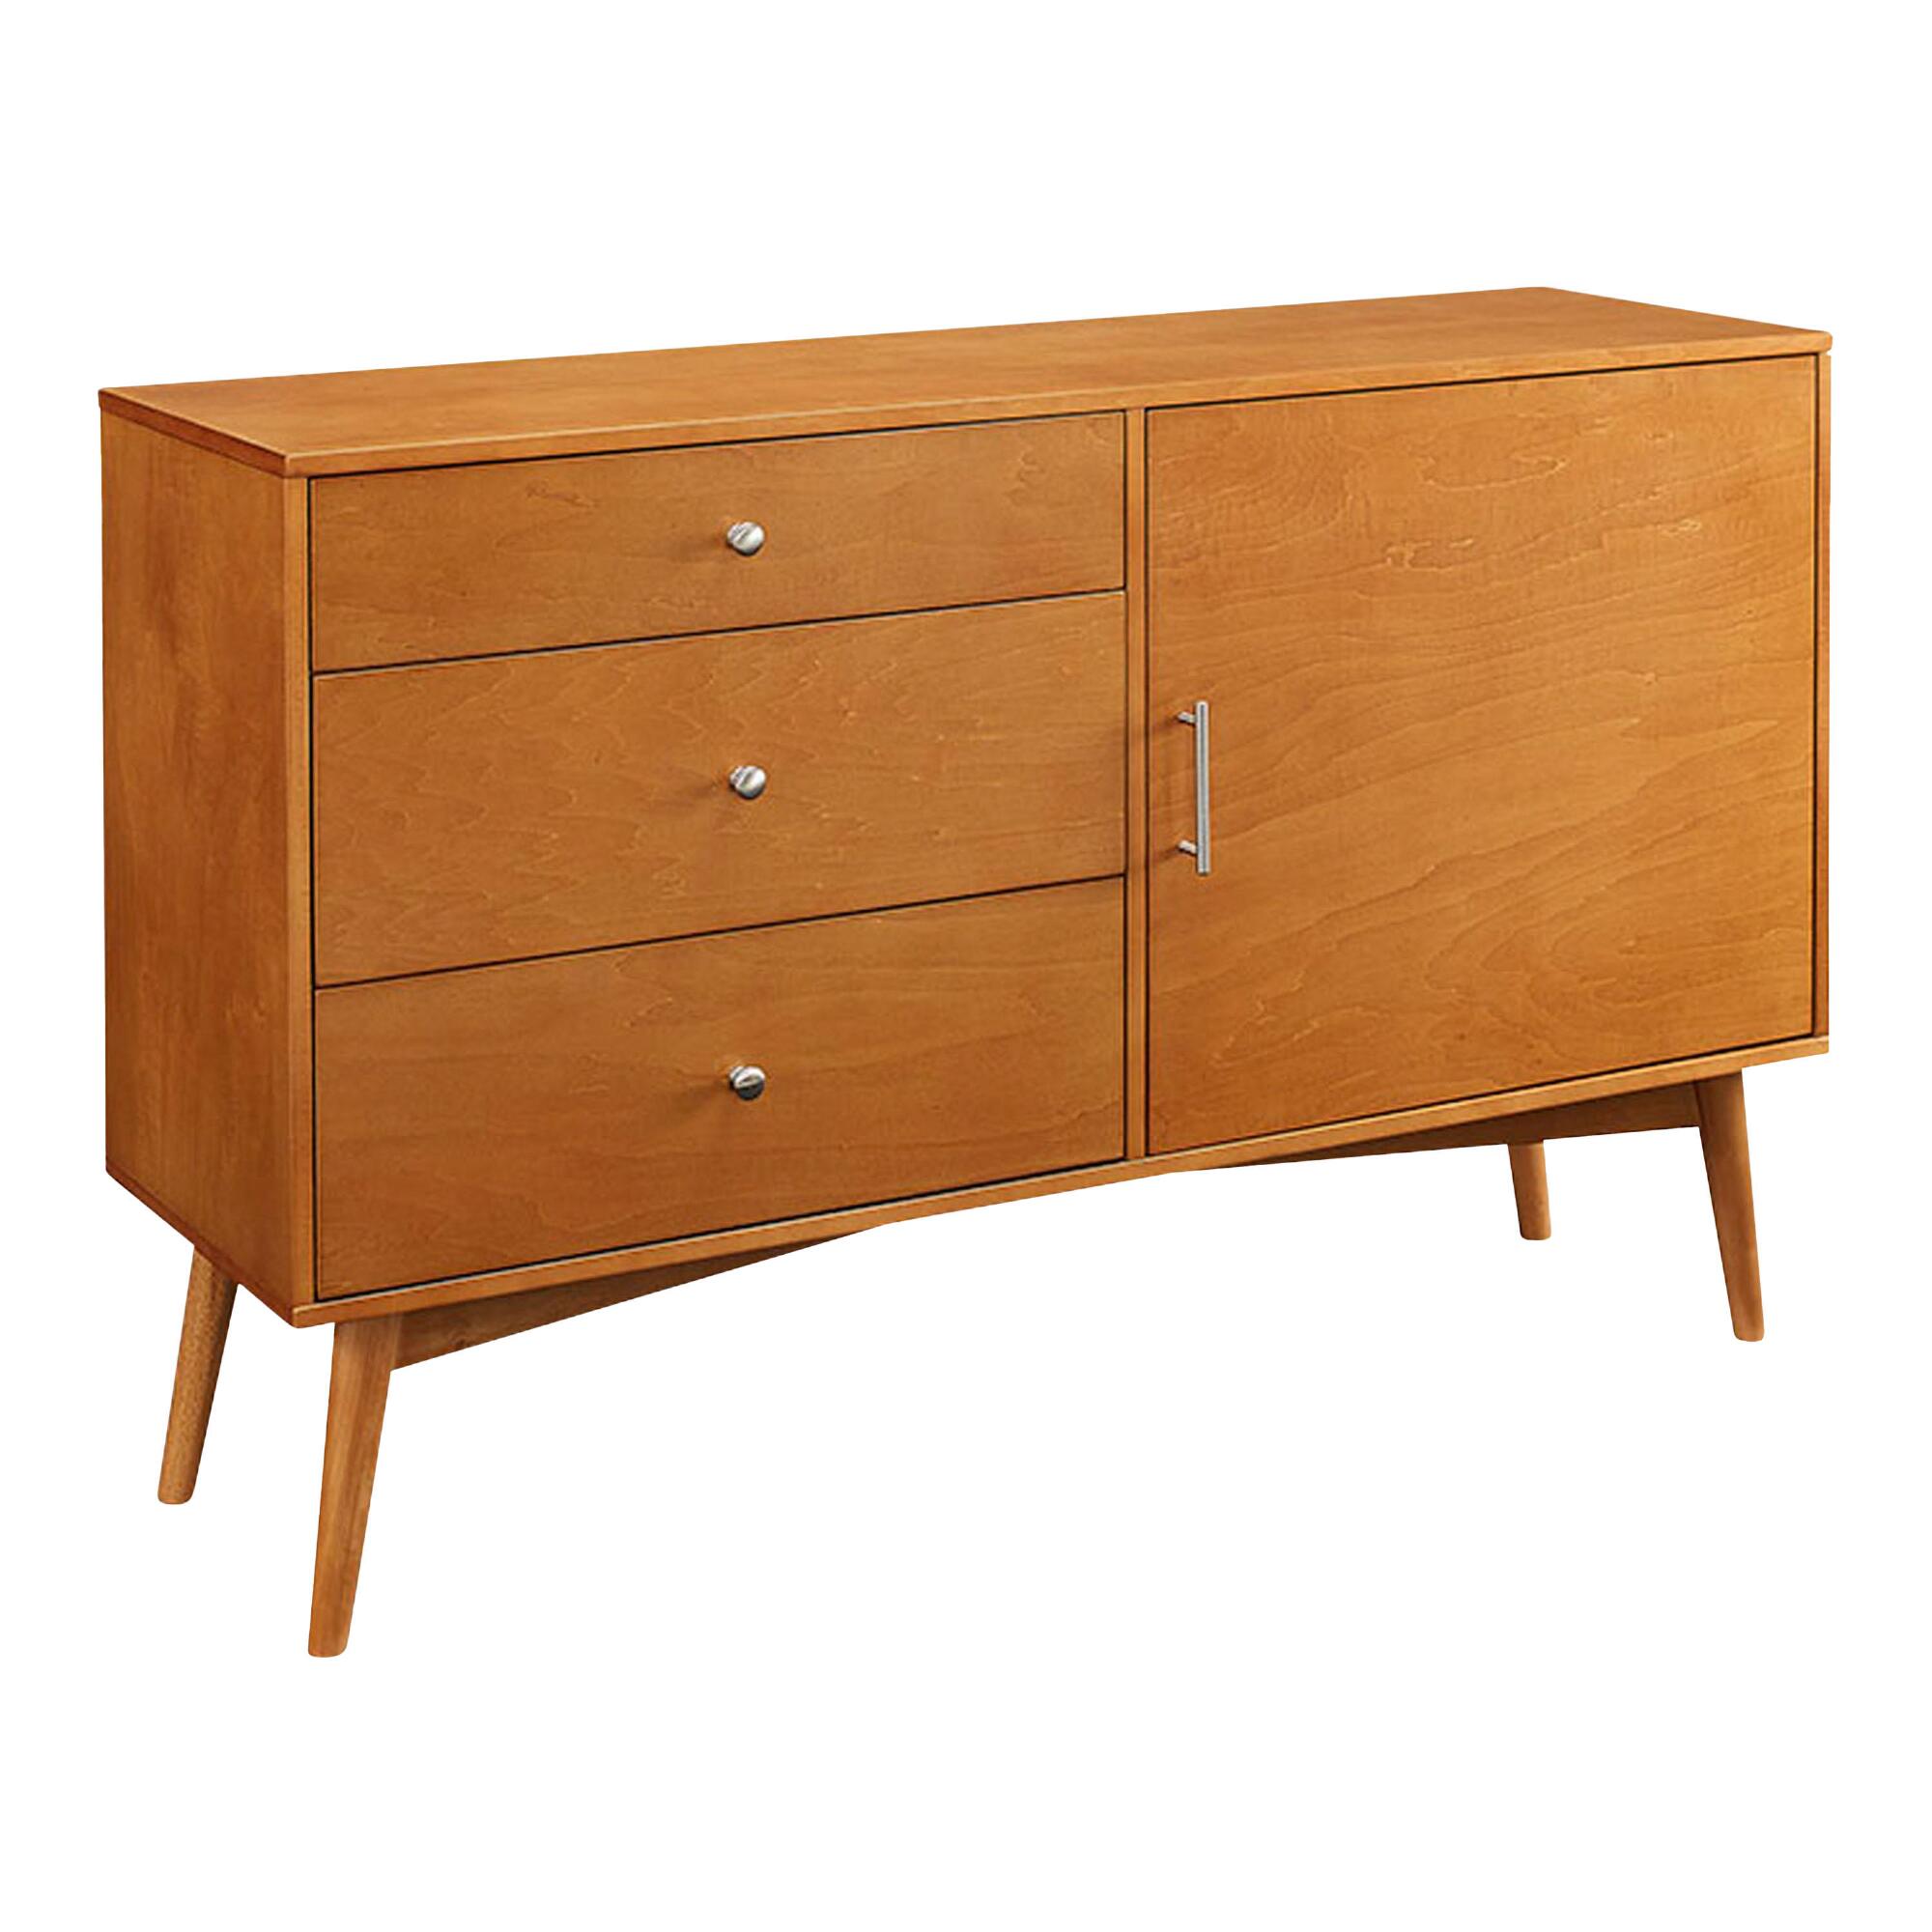 Wood Mid Century Media Stand With Drawers: White by World Market